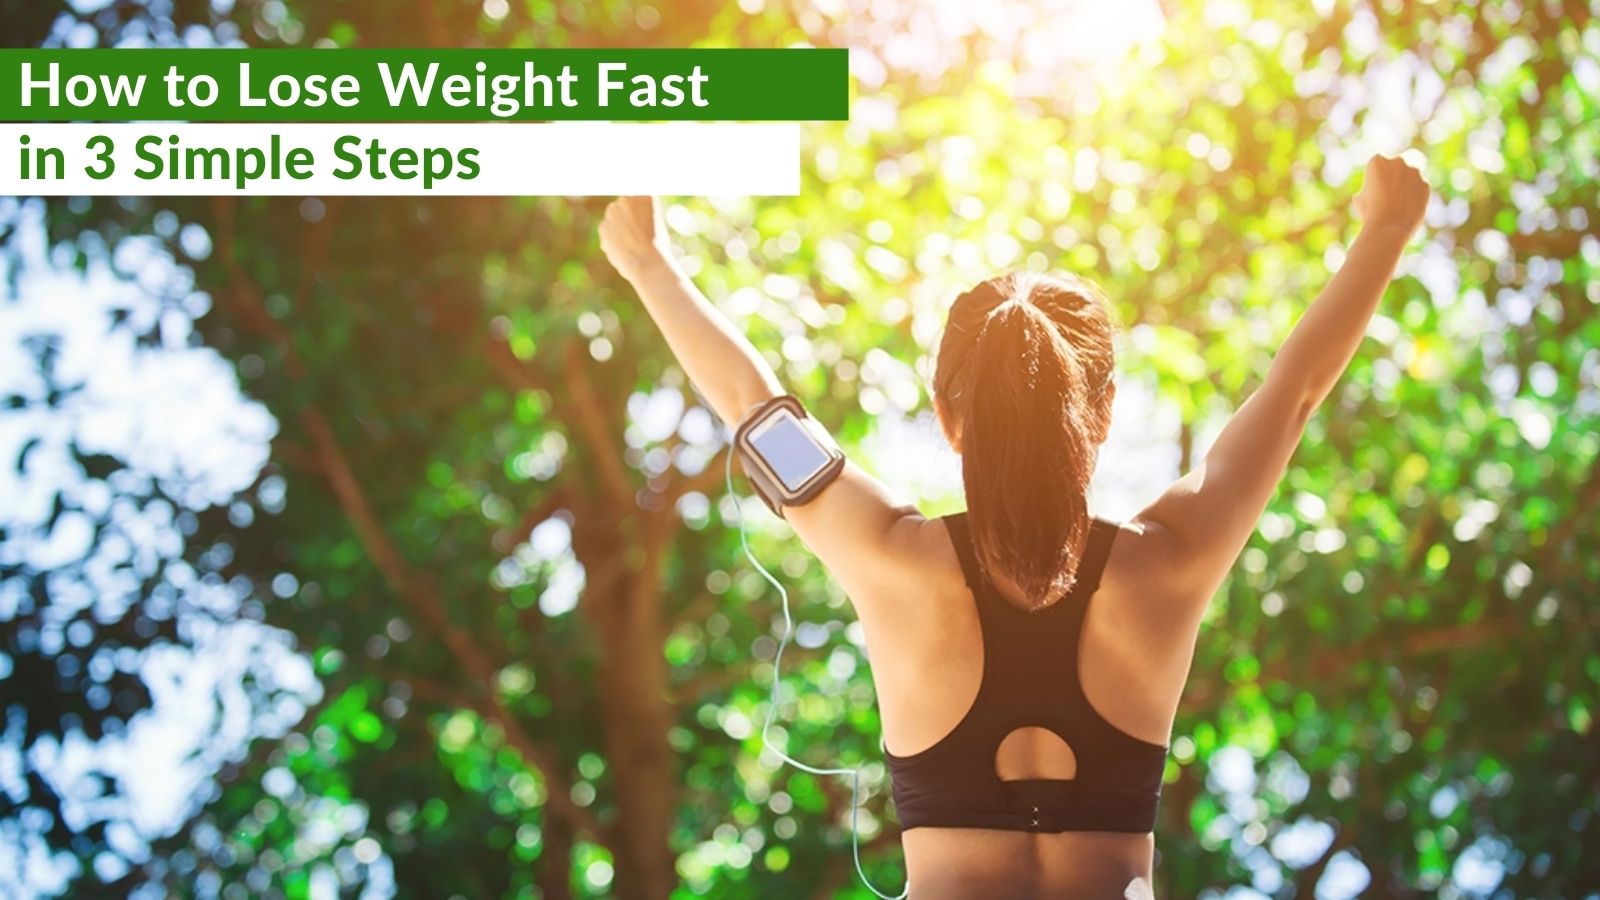 How to Lose Weight Fast in 3 Simple Steps